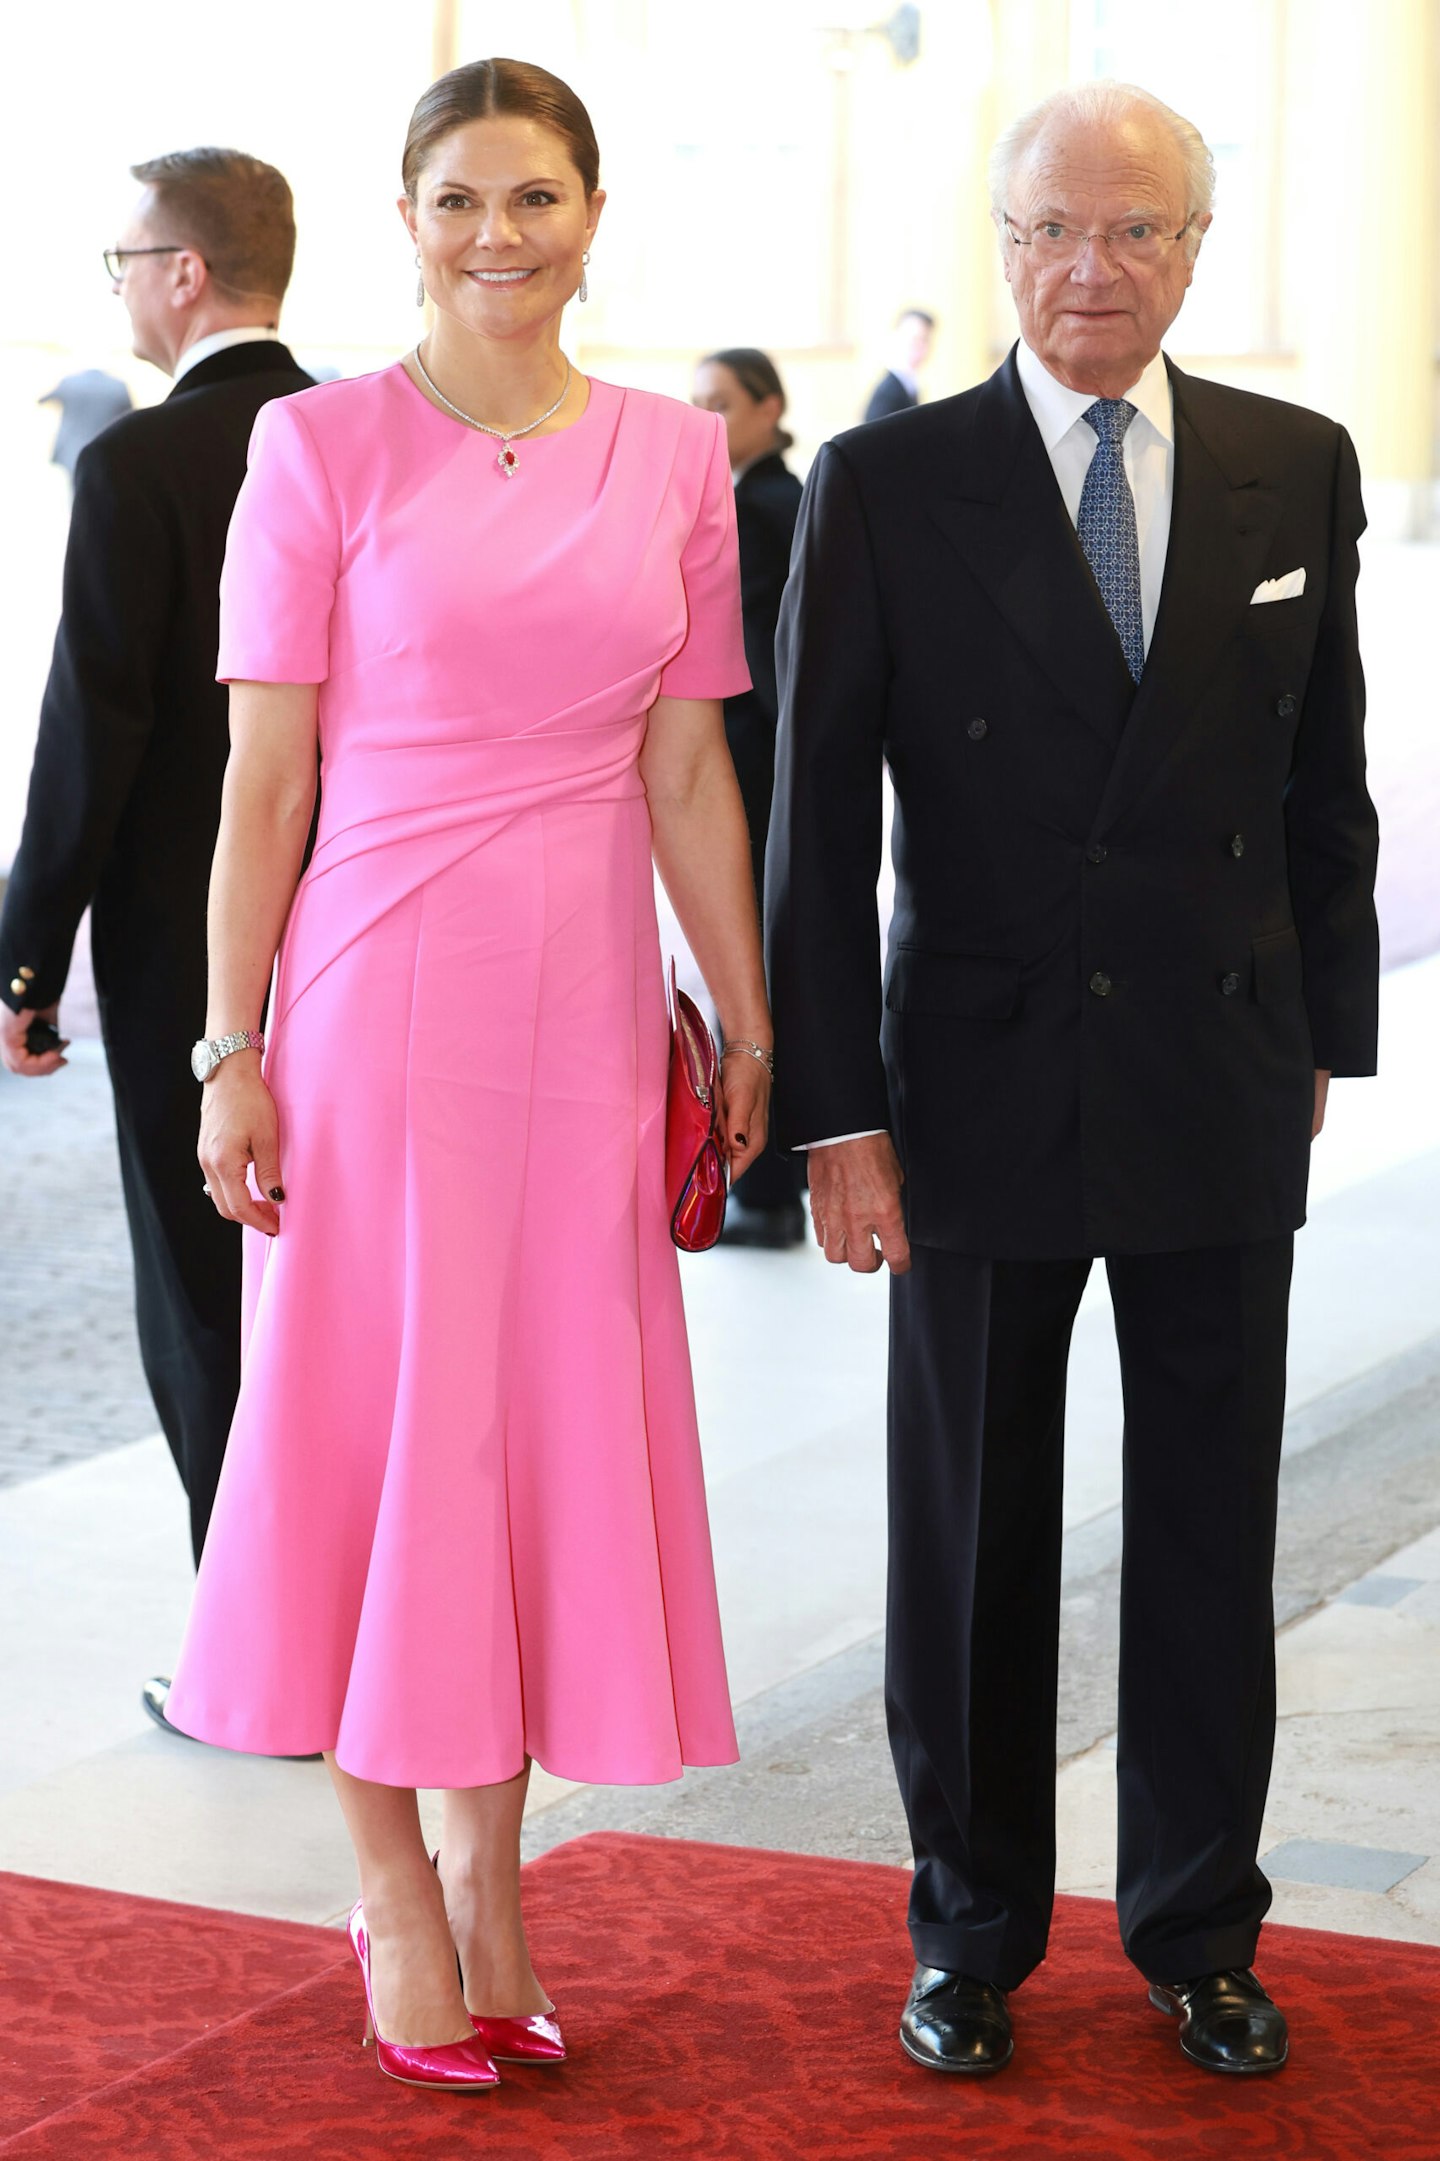 Victoria, Crown Princess of Sweden and Carl XVI Gustaf, King of Sweden attend the Coronation Reception for overseas